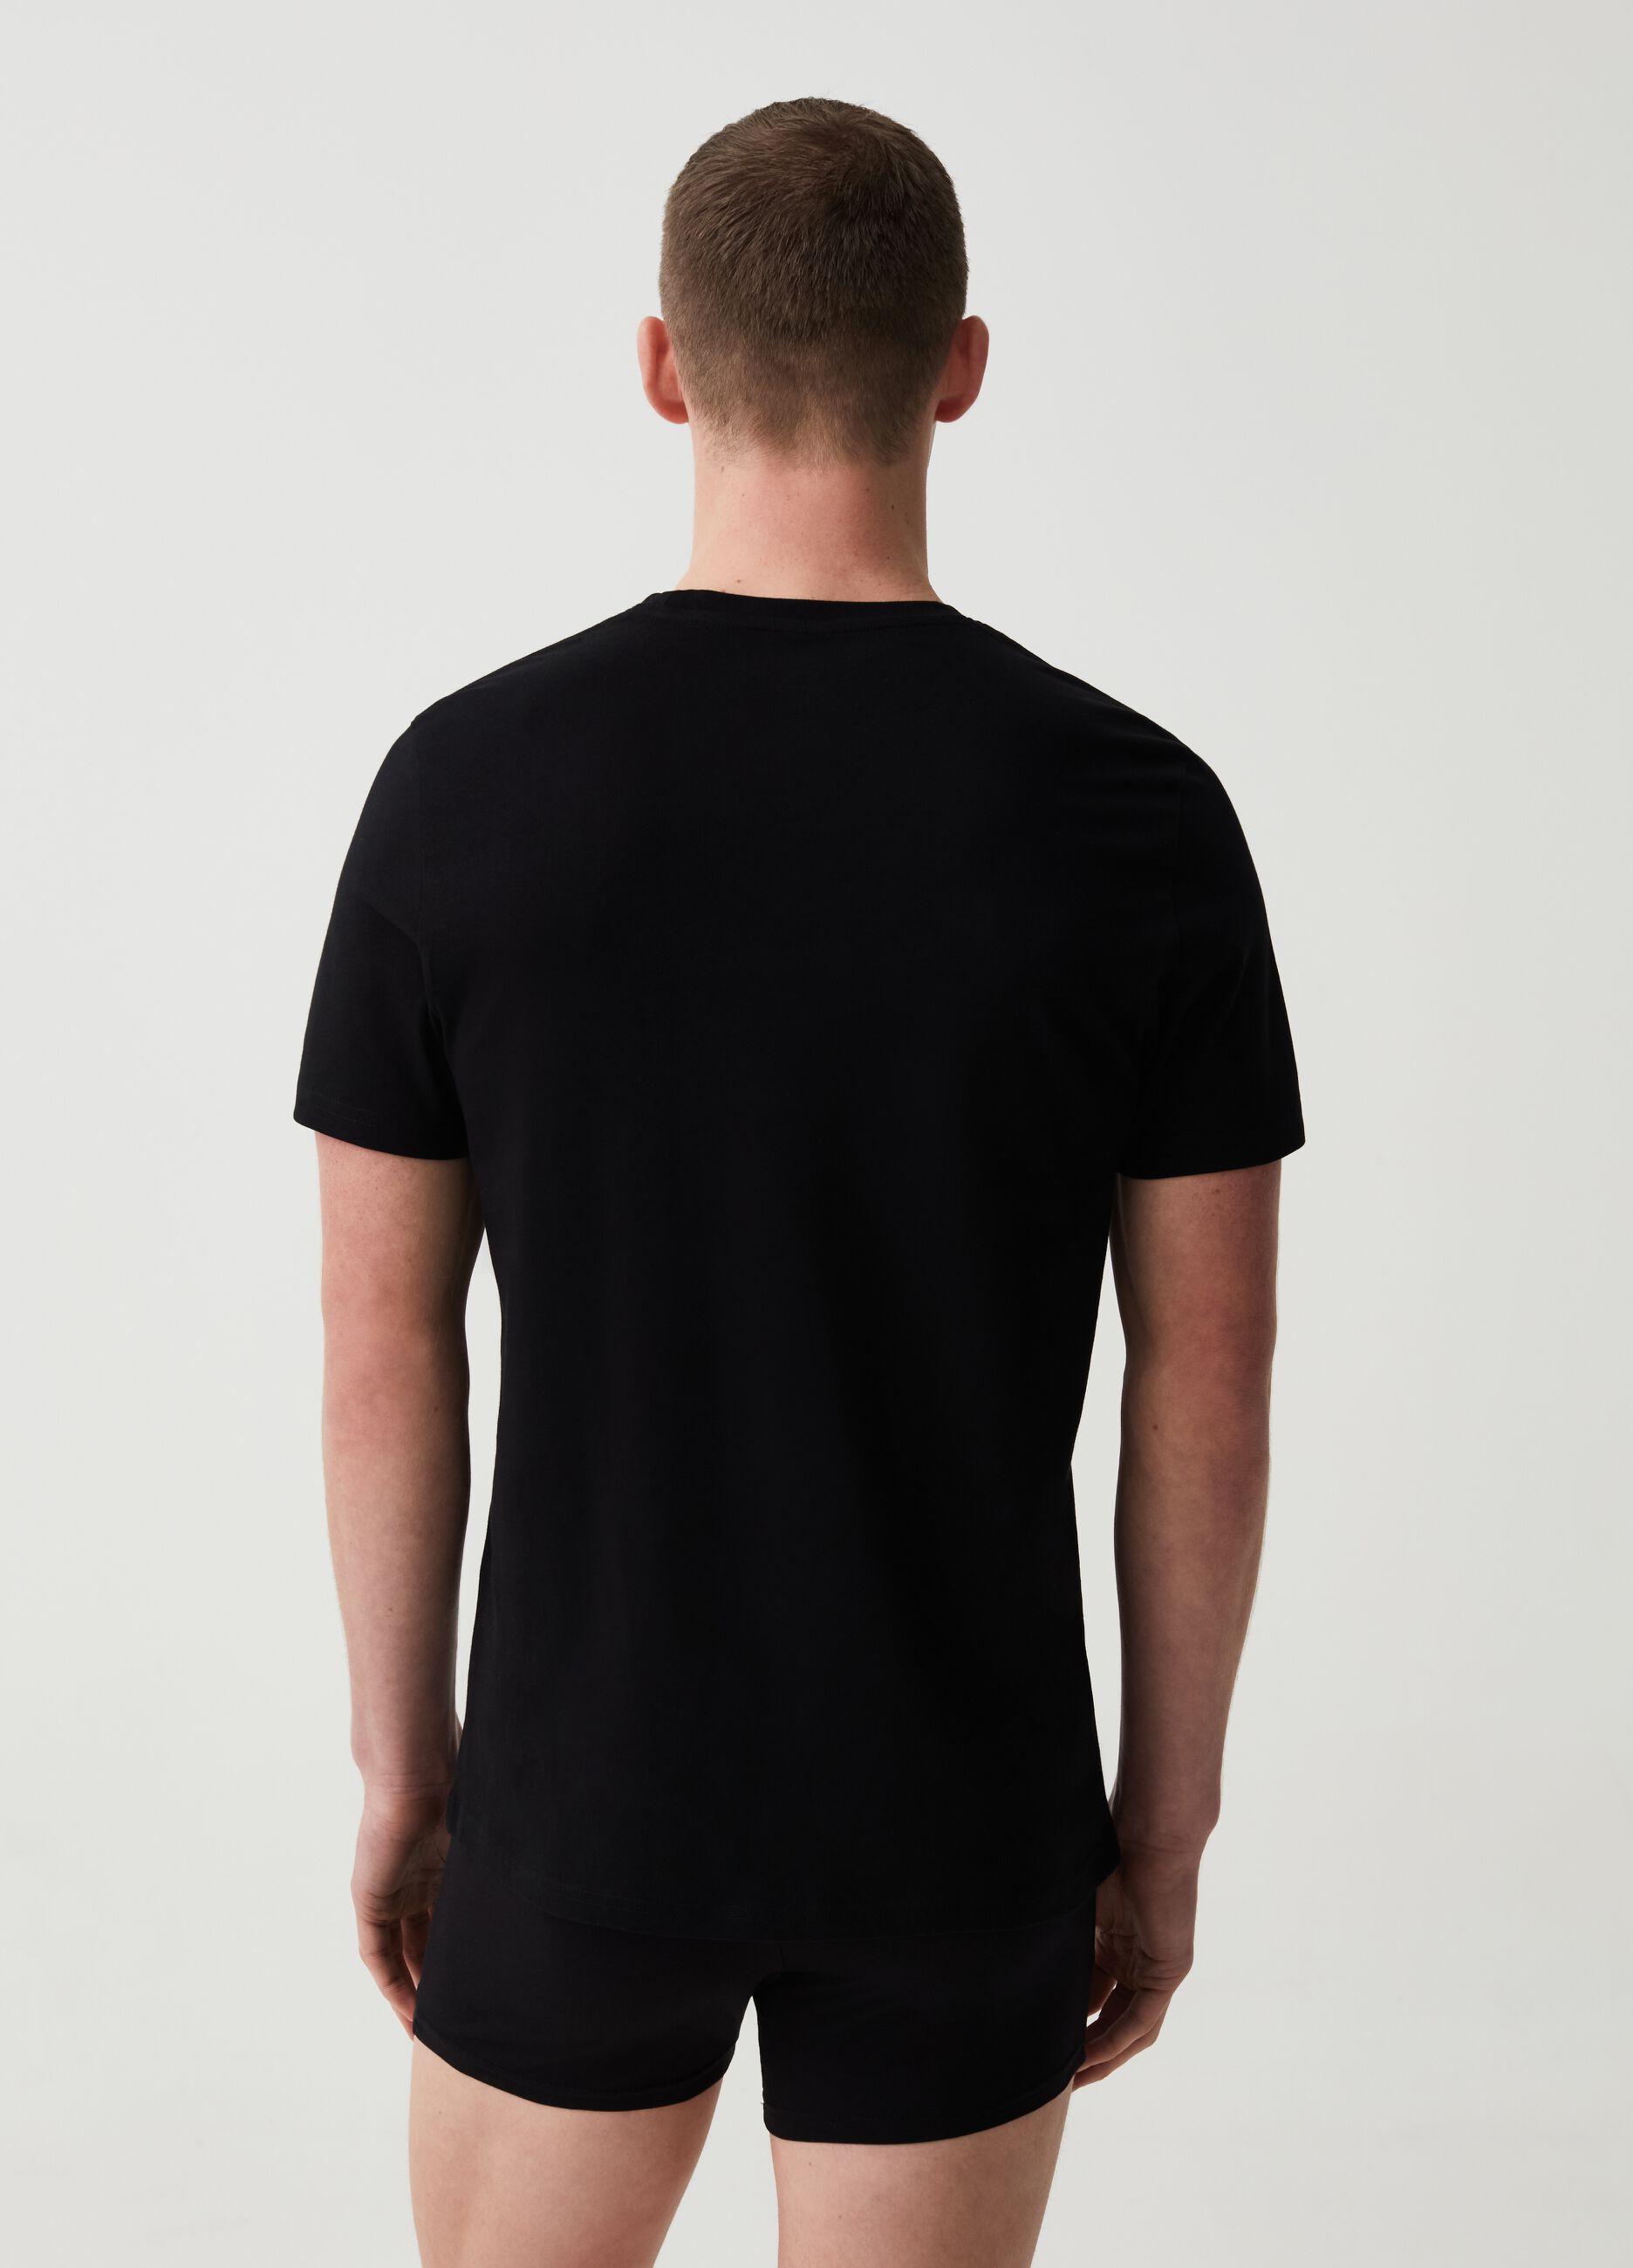 Bipack t-shirt intime termiche in cotone